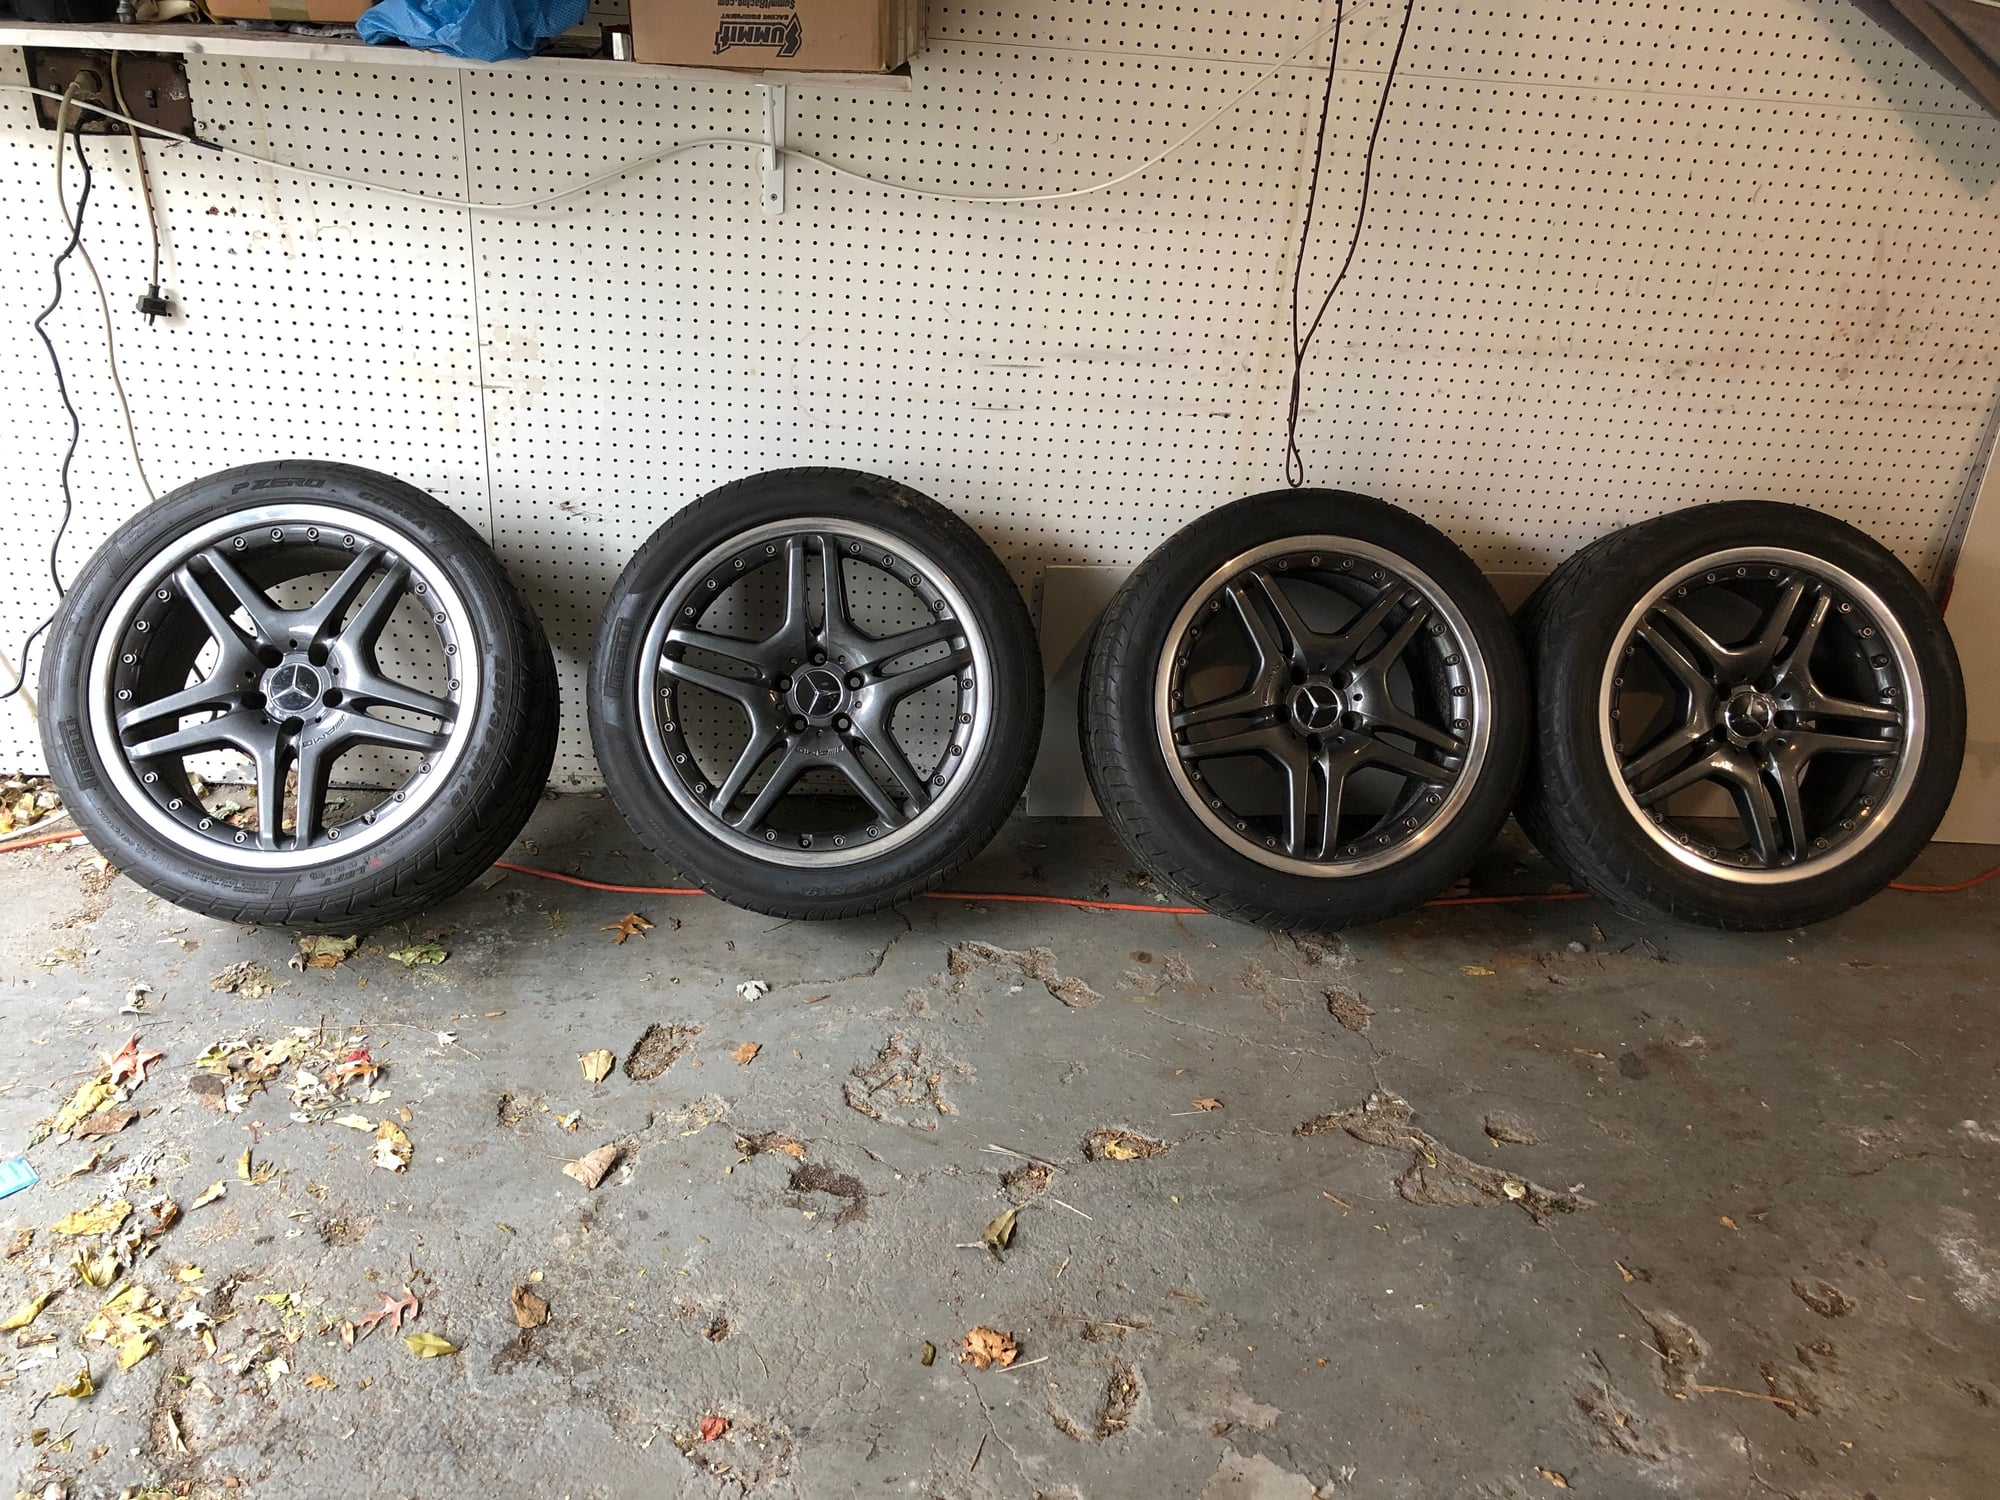 Wheels and Tires/Axles - SL65 R230 2 piece wheels OEM - Used - 2003 to 2012 Mercedes-Benz SL65 AMG - 2003 to 2006 Mercedes-Benz E55 AMG - Queens, NY 11356, United States